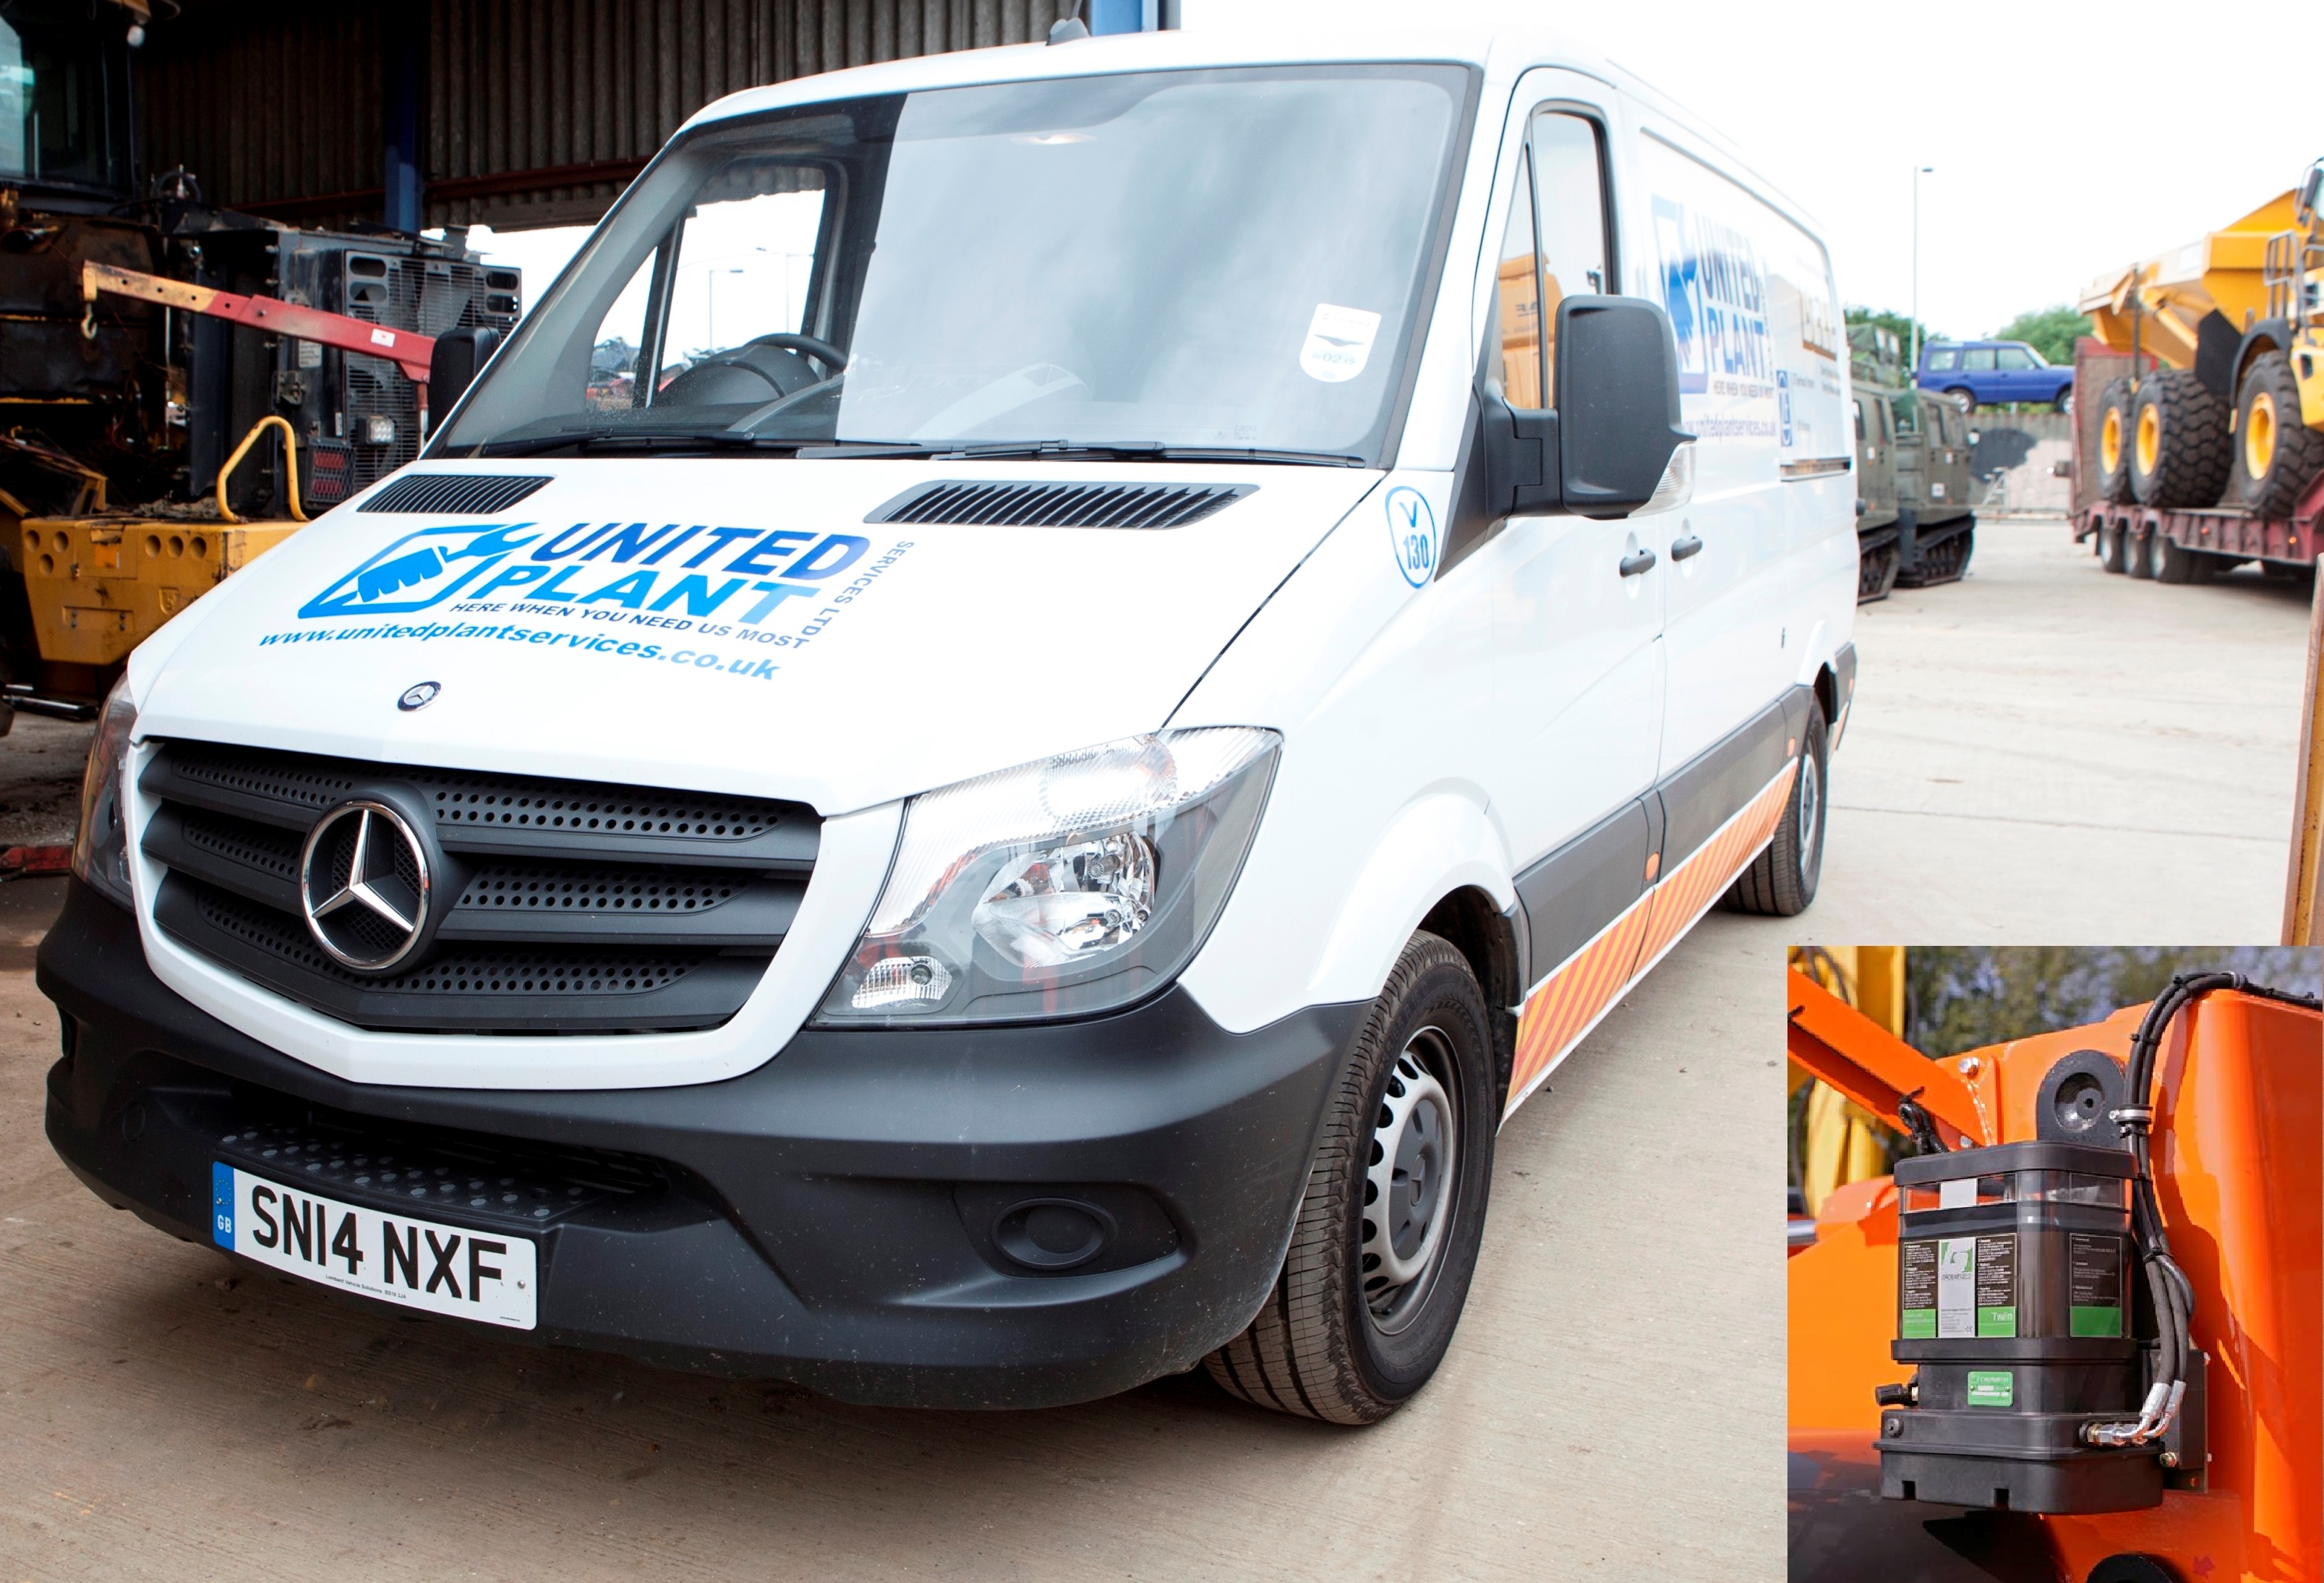 Plant machinery maintenance specialist United Plant Services 